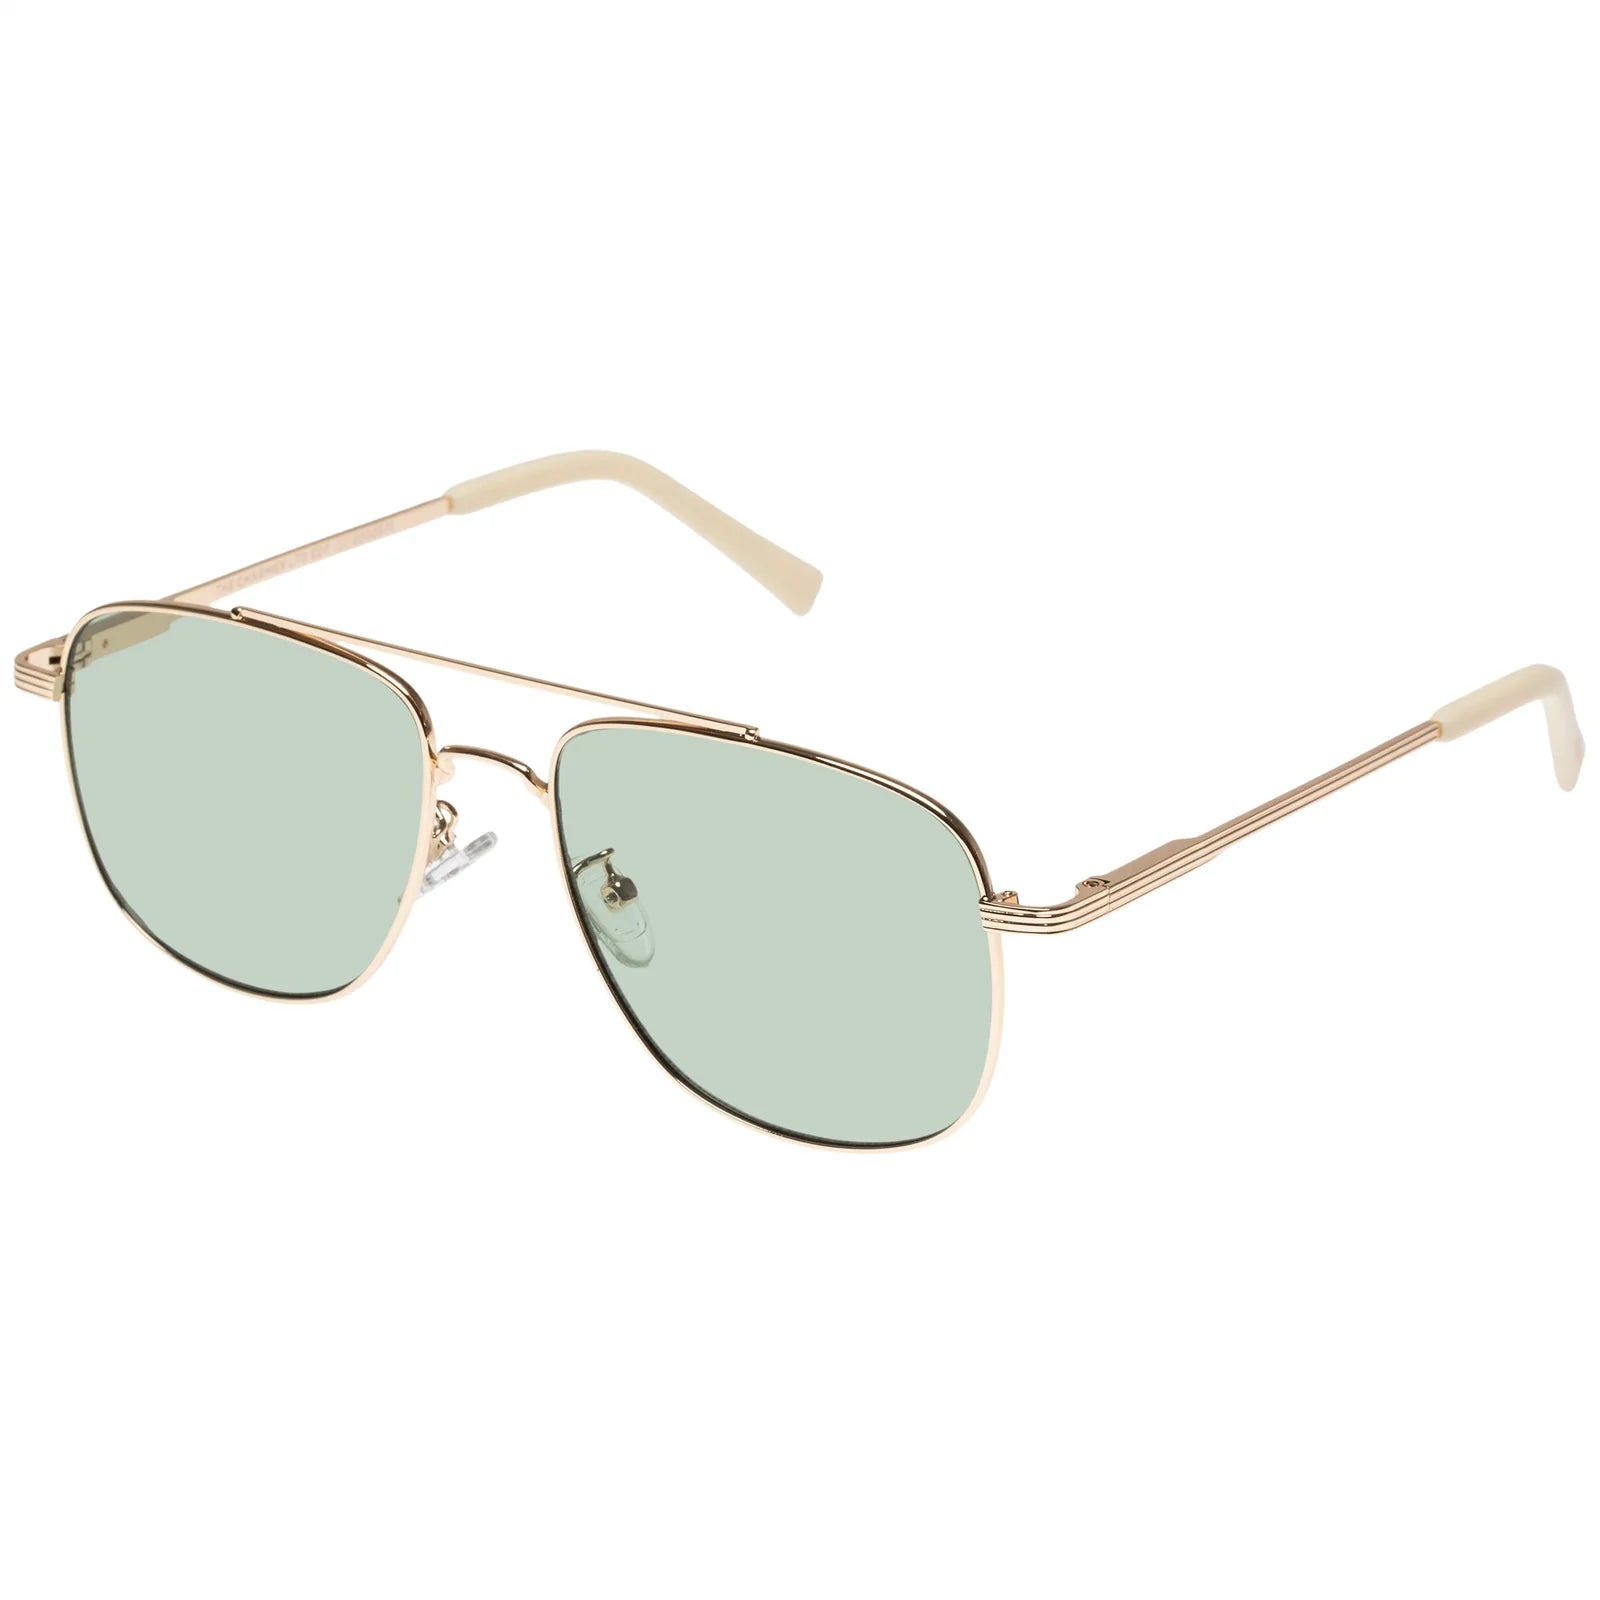 The Charmer *Limited Edition* - Bright Gold W/Mint Tint Lens